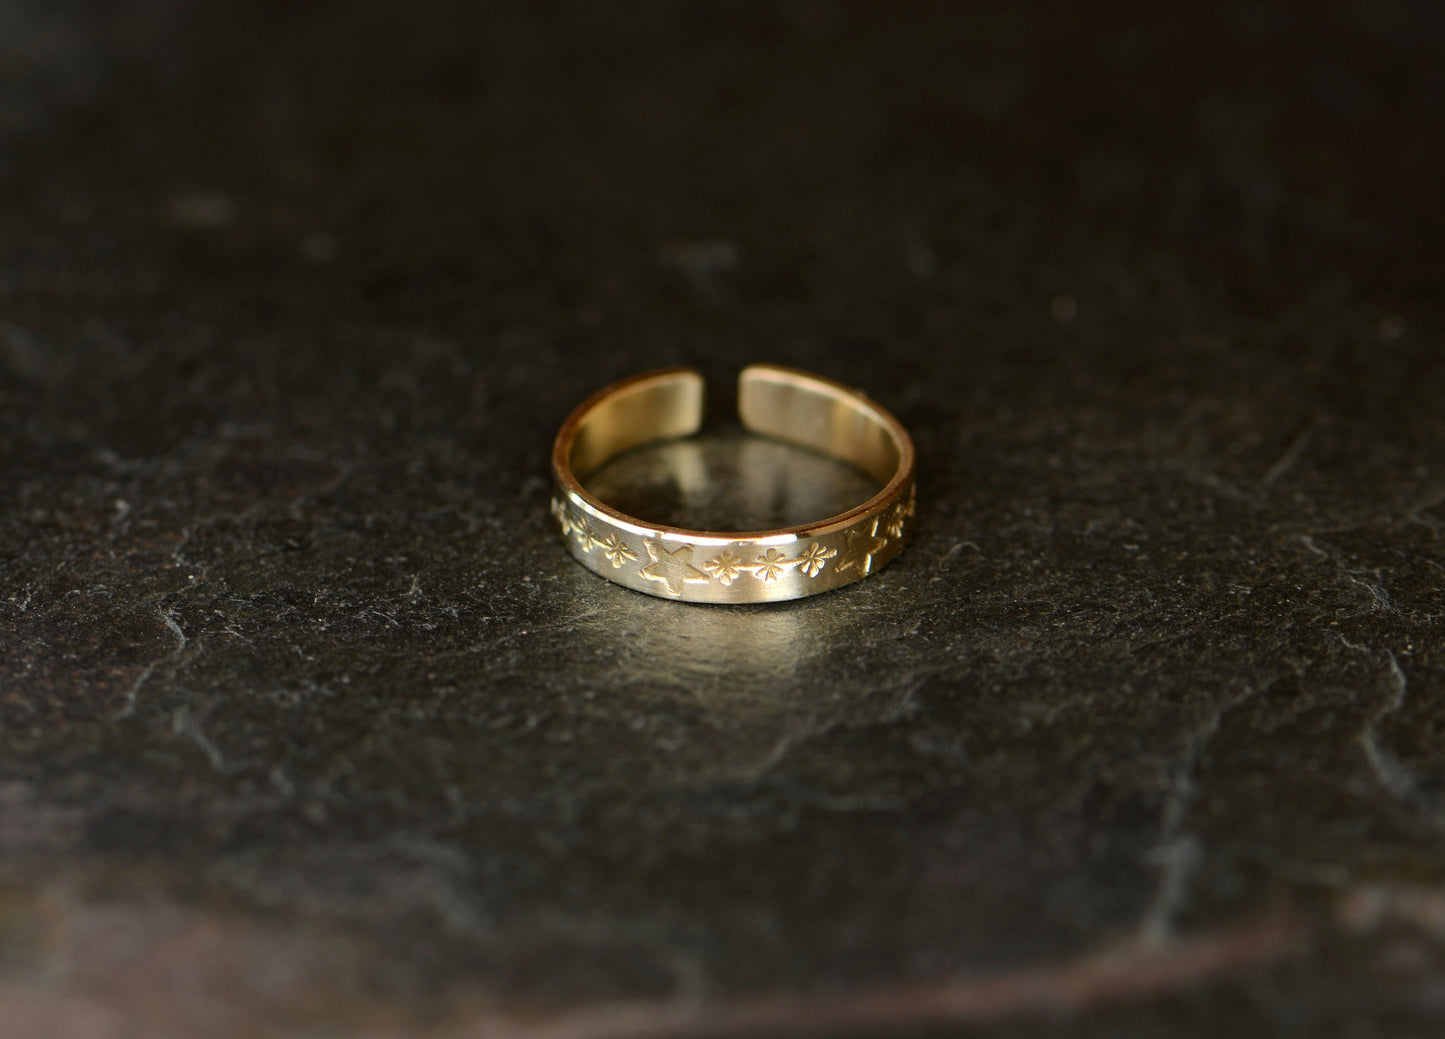 Solid 14k yellow gold toe ring stamped with stars